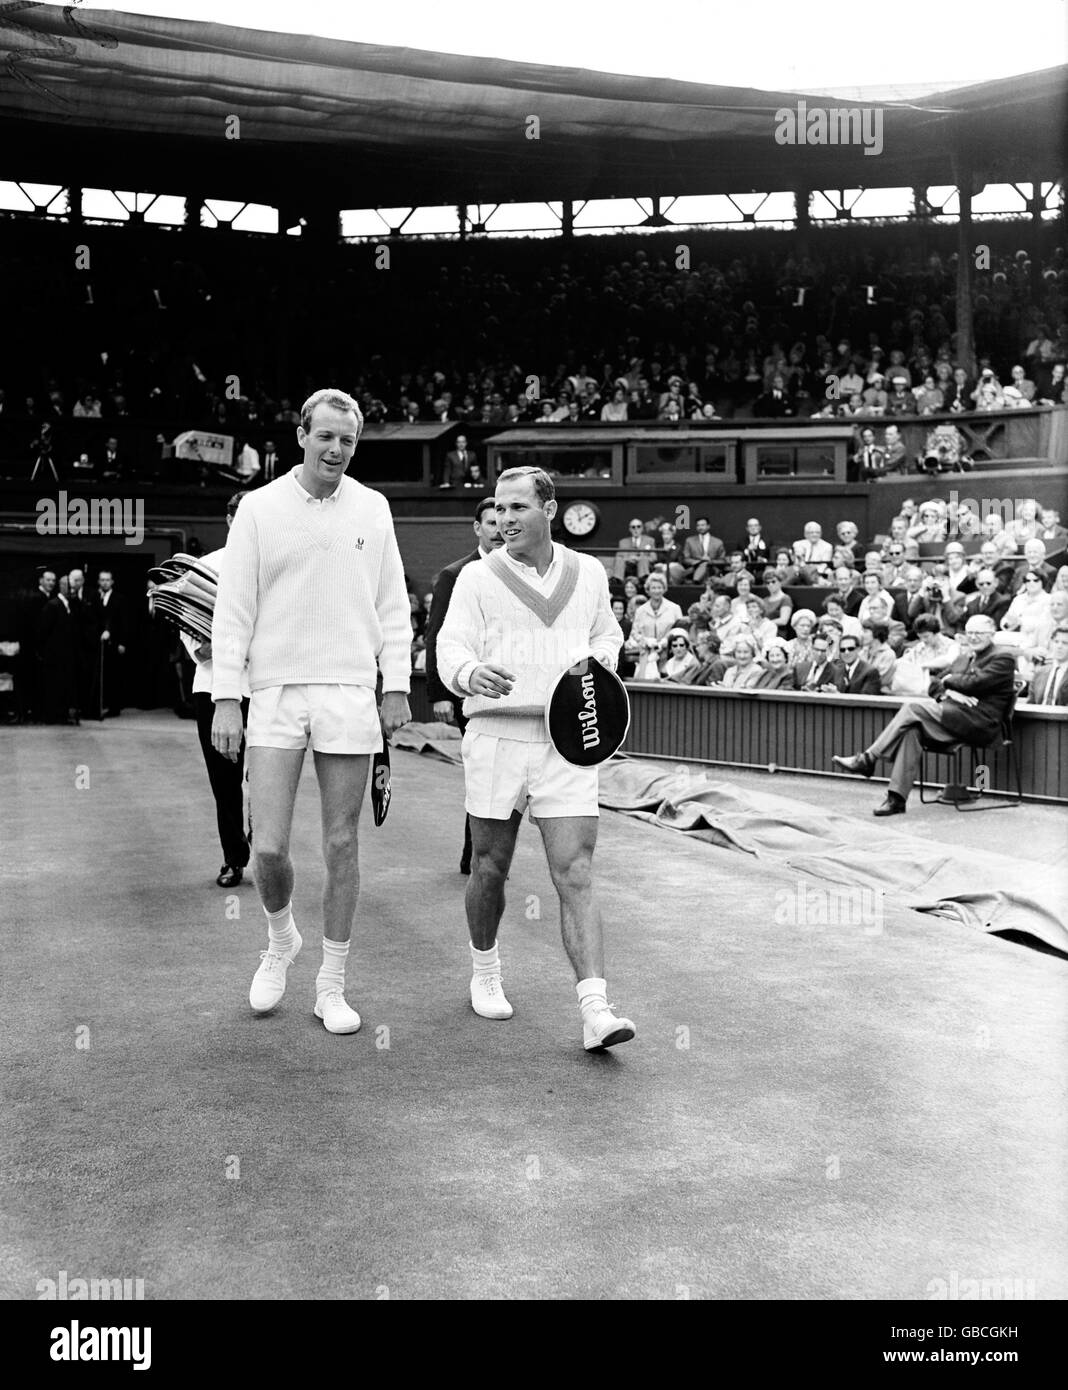 (L-R) Fred Stolle and Chuck McKinley make their way onto court for the final Stock Photo